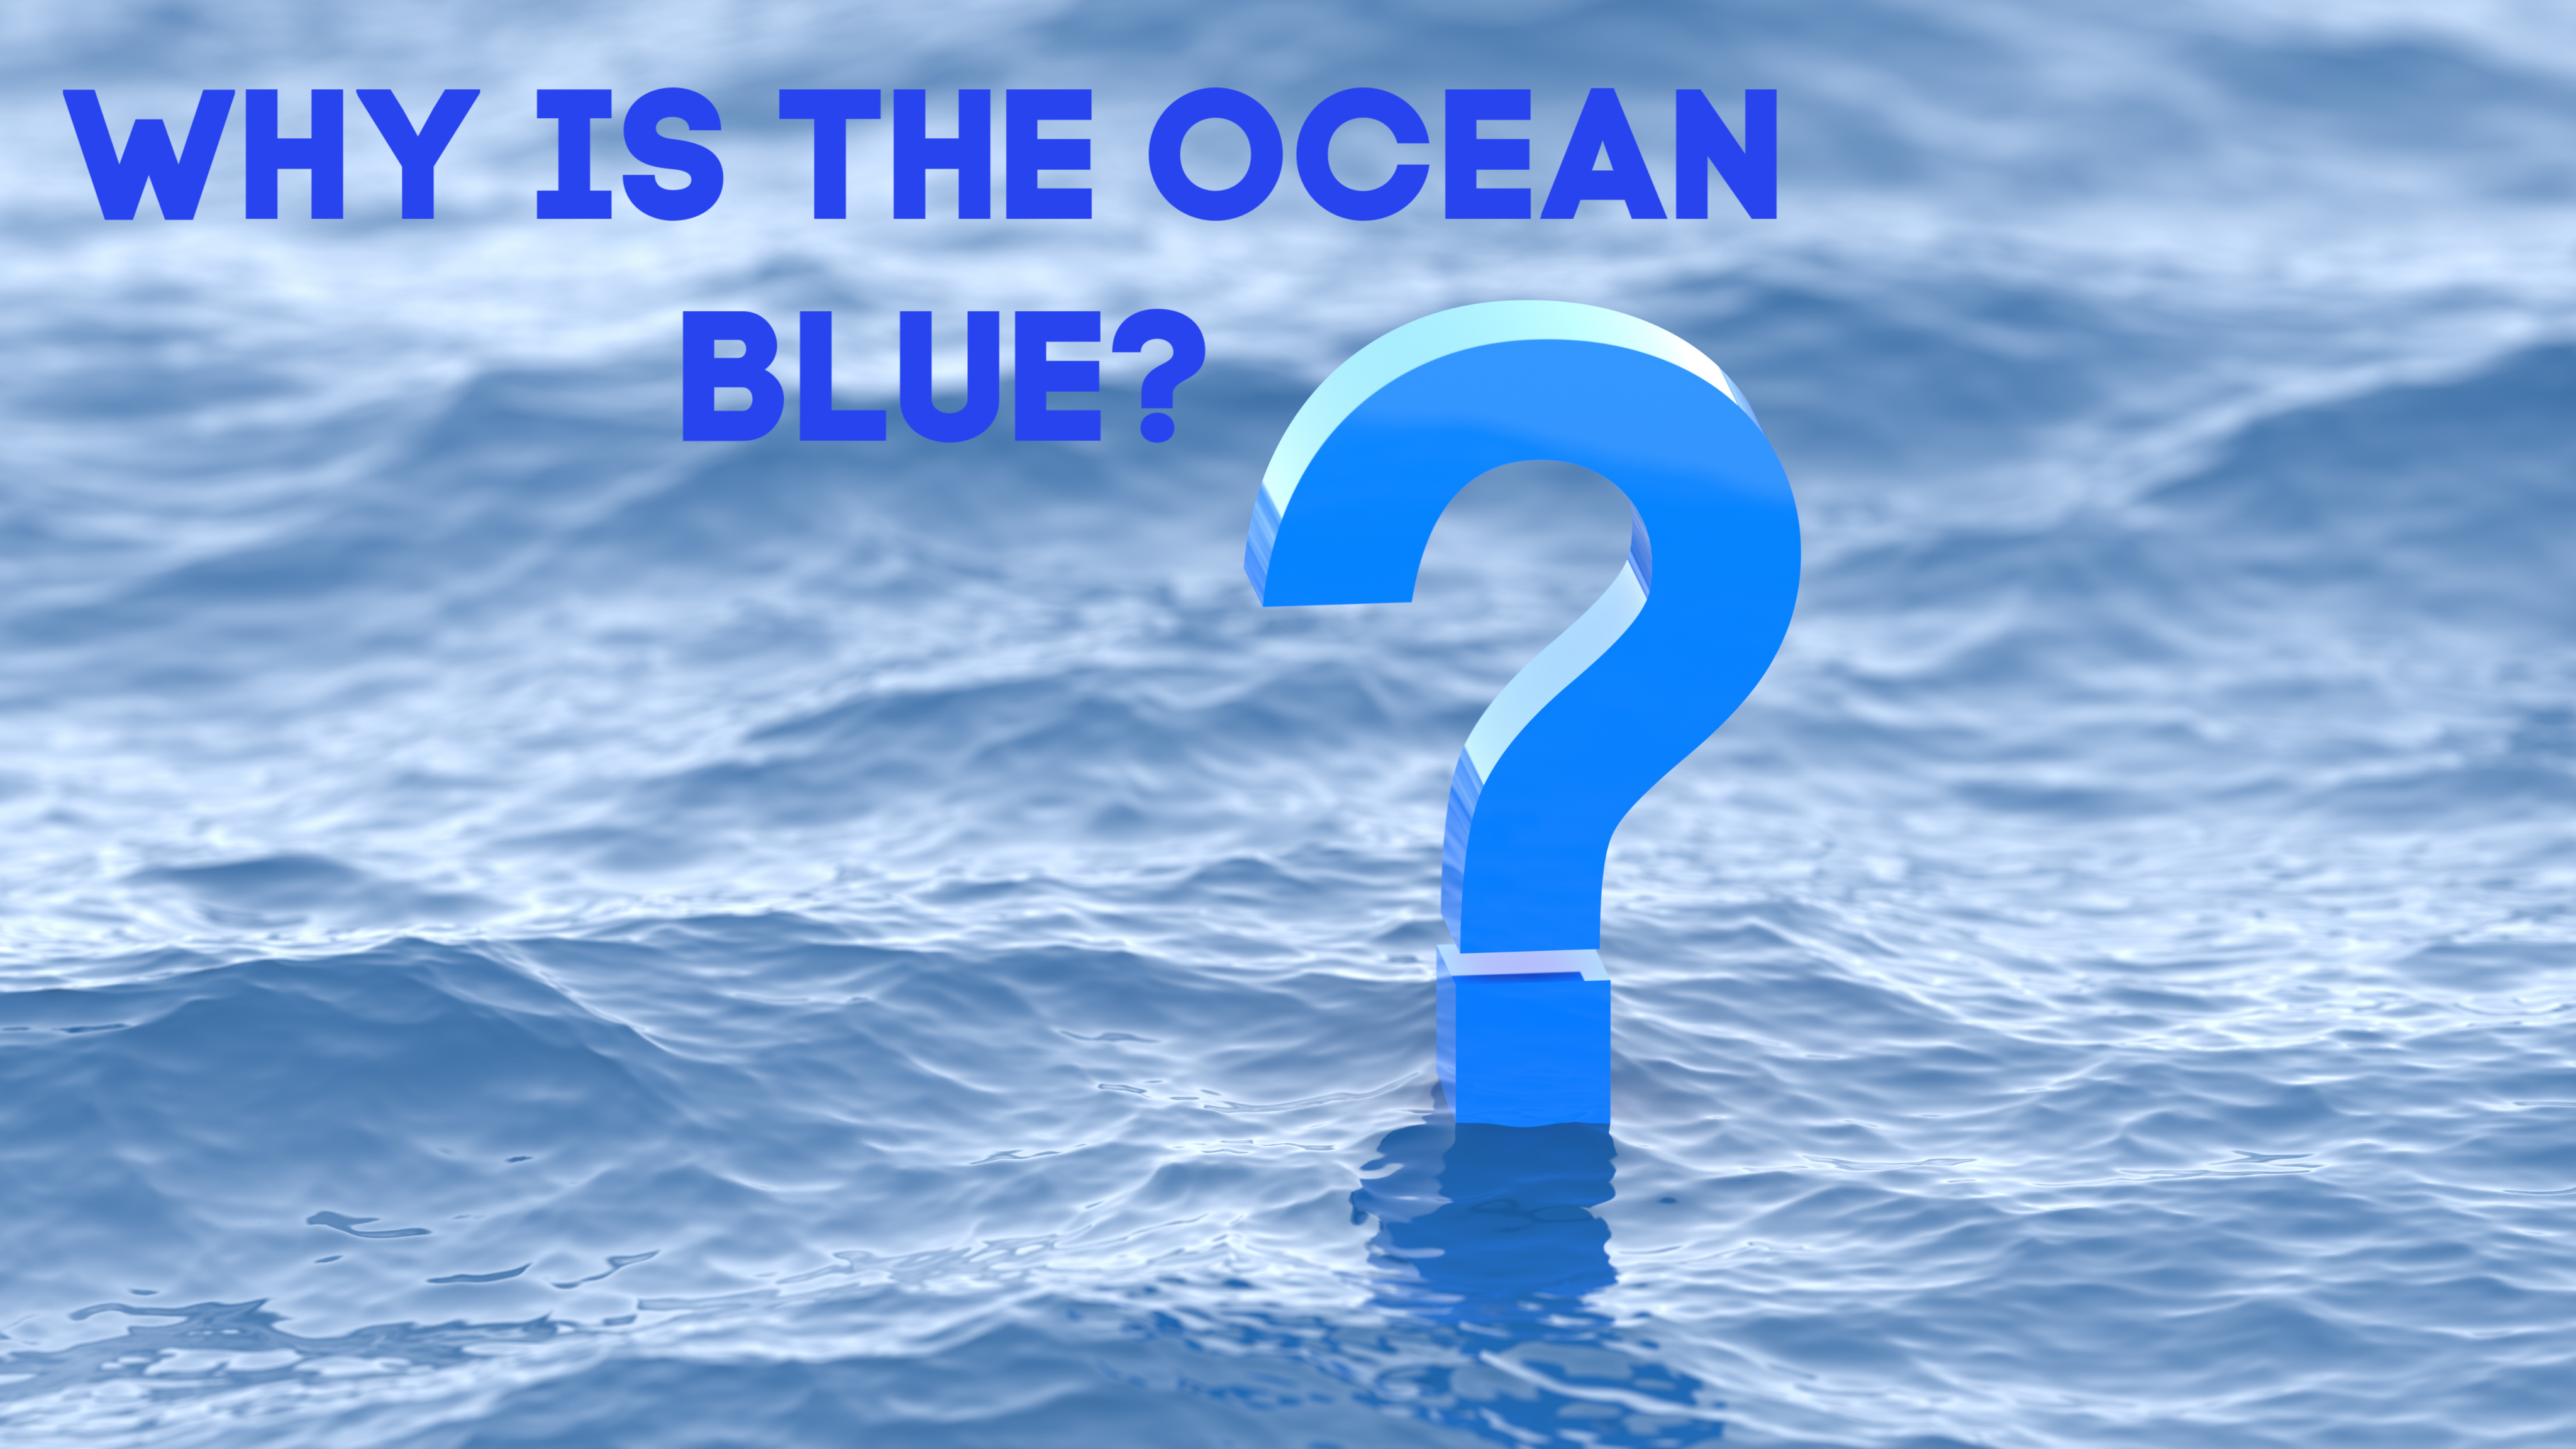 https://www.science-sparks.com/wp-content/uploads/2019/06/Why-is-the-coean-blue.jpg